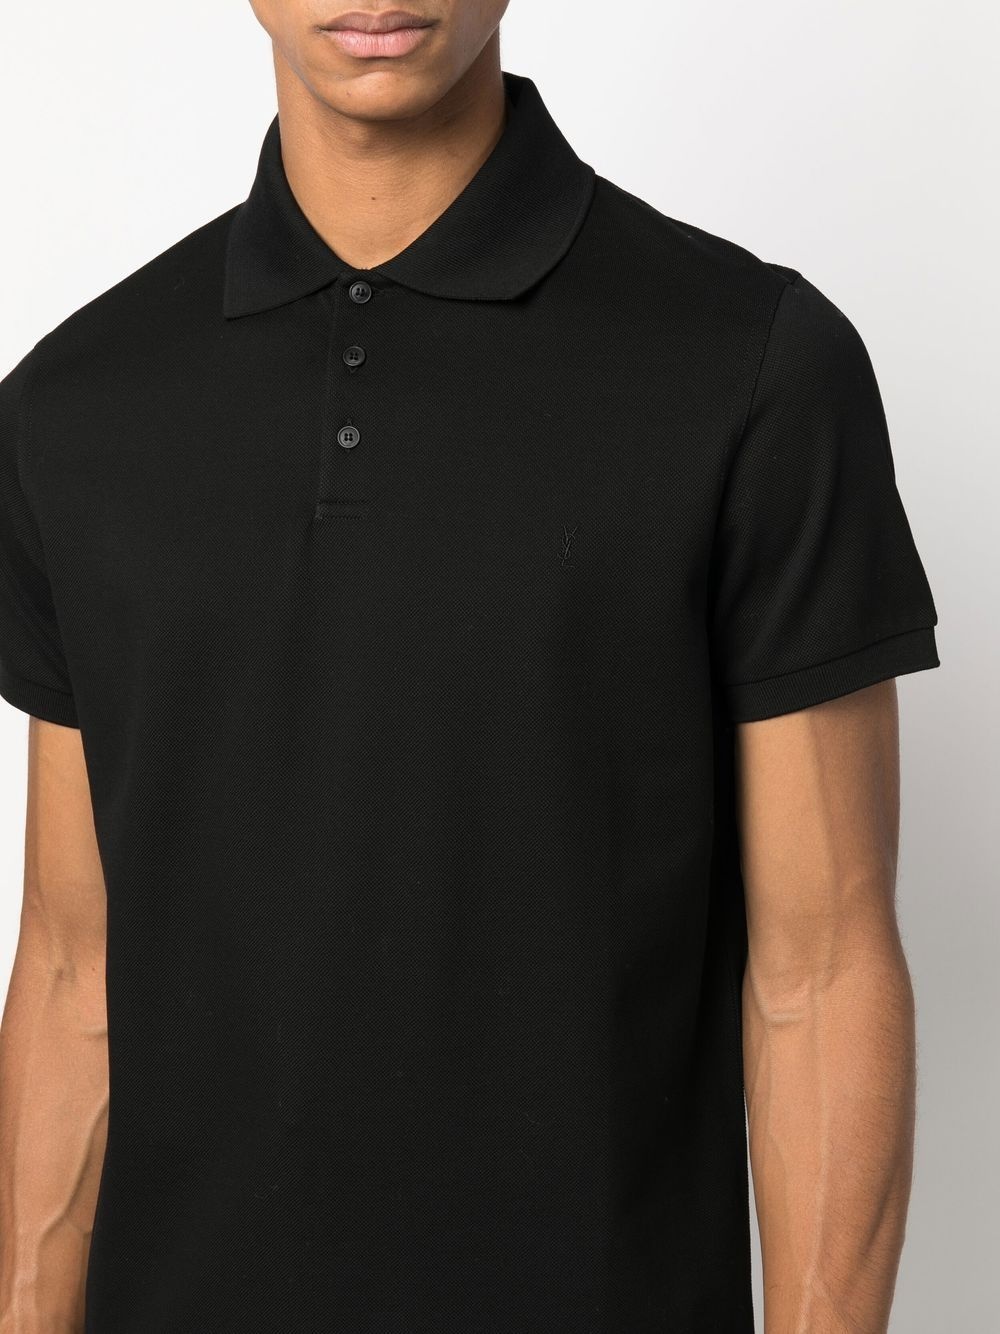 embroidered-logo short-sleeved polo shirt - 5